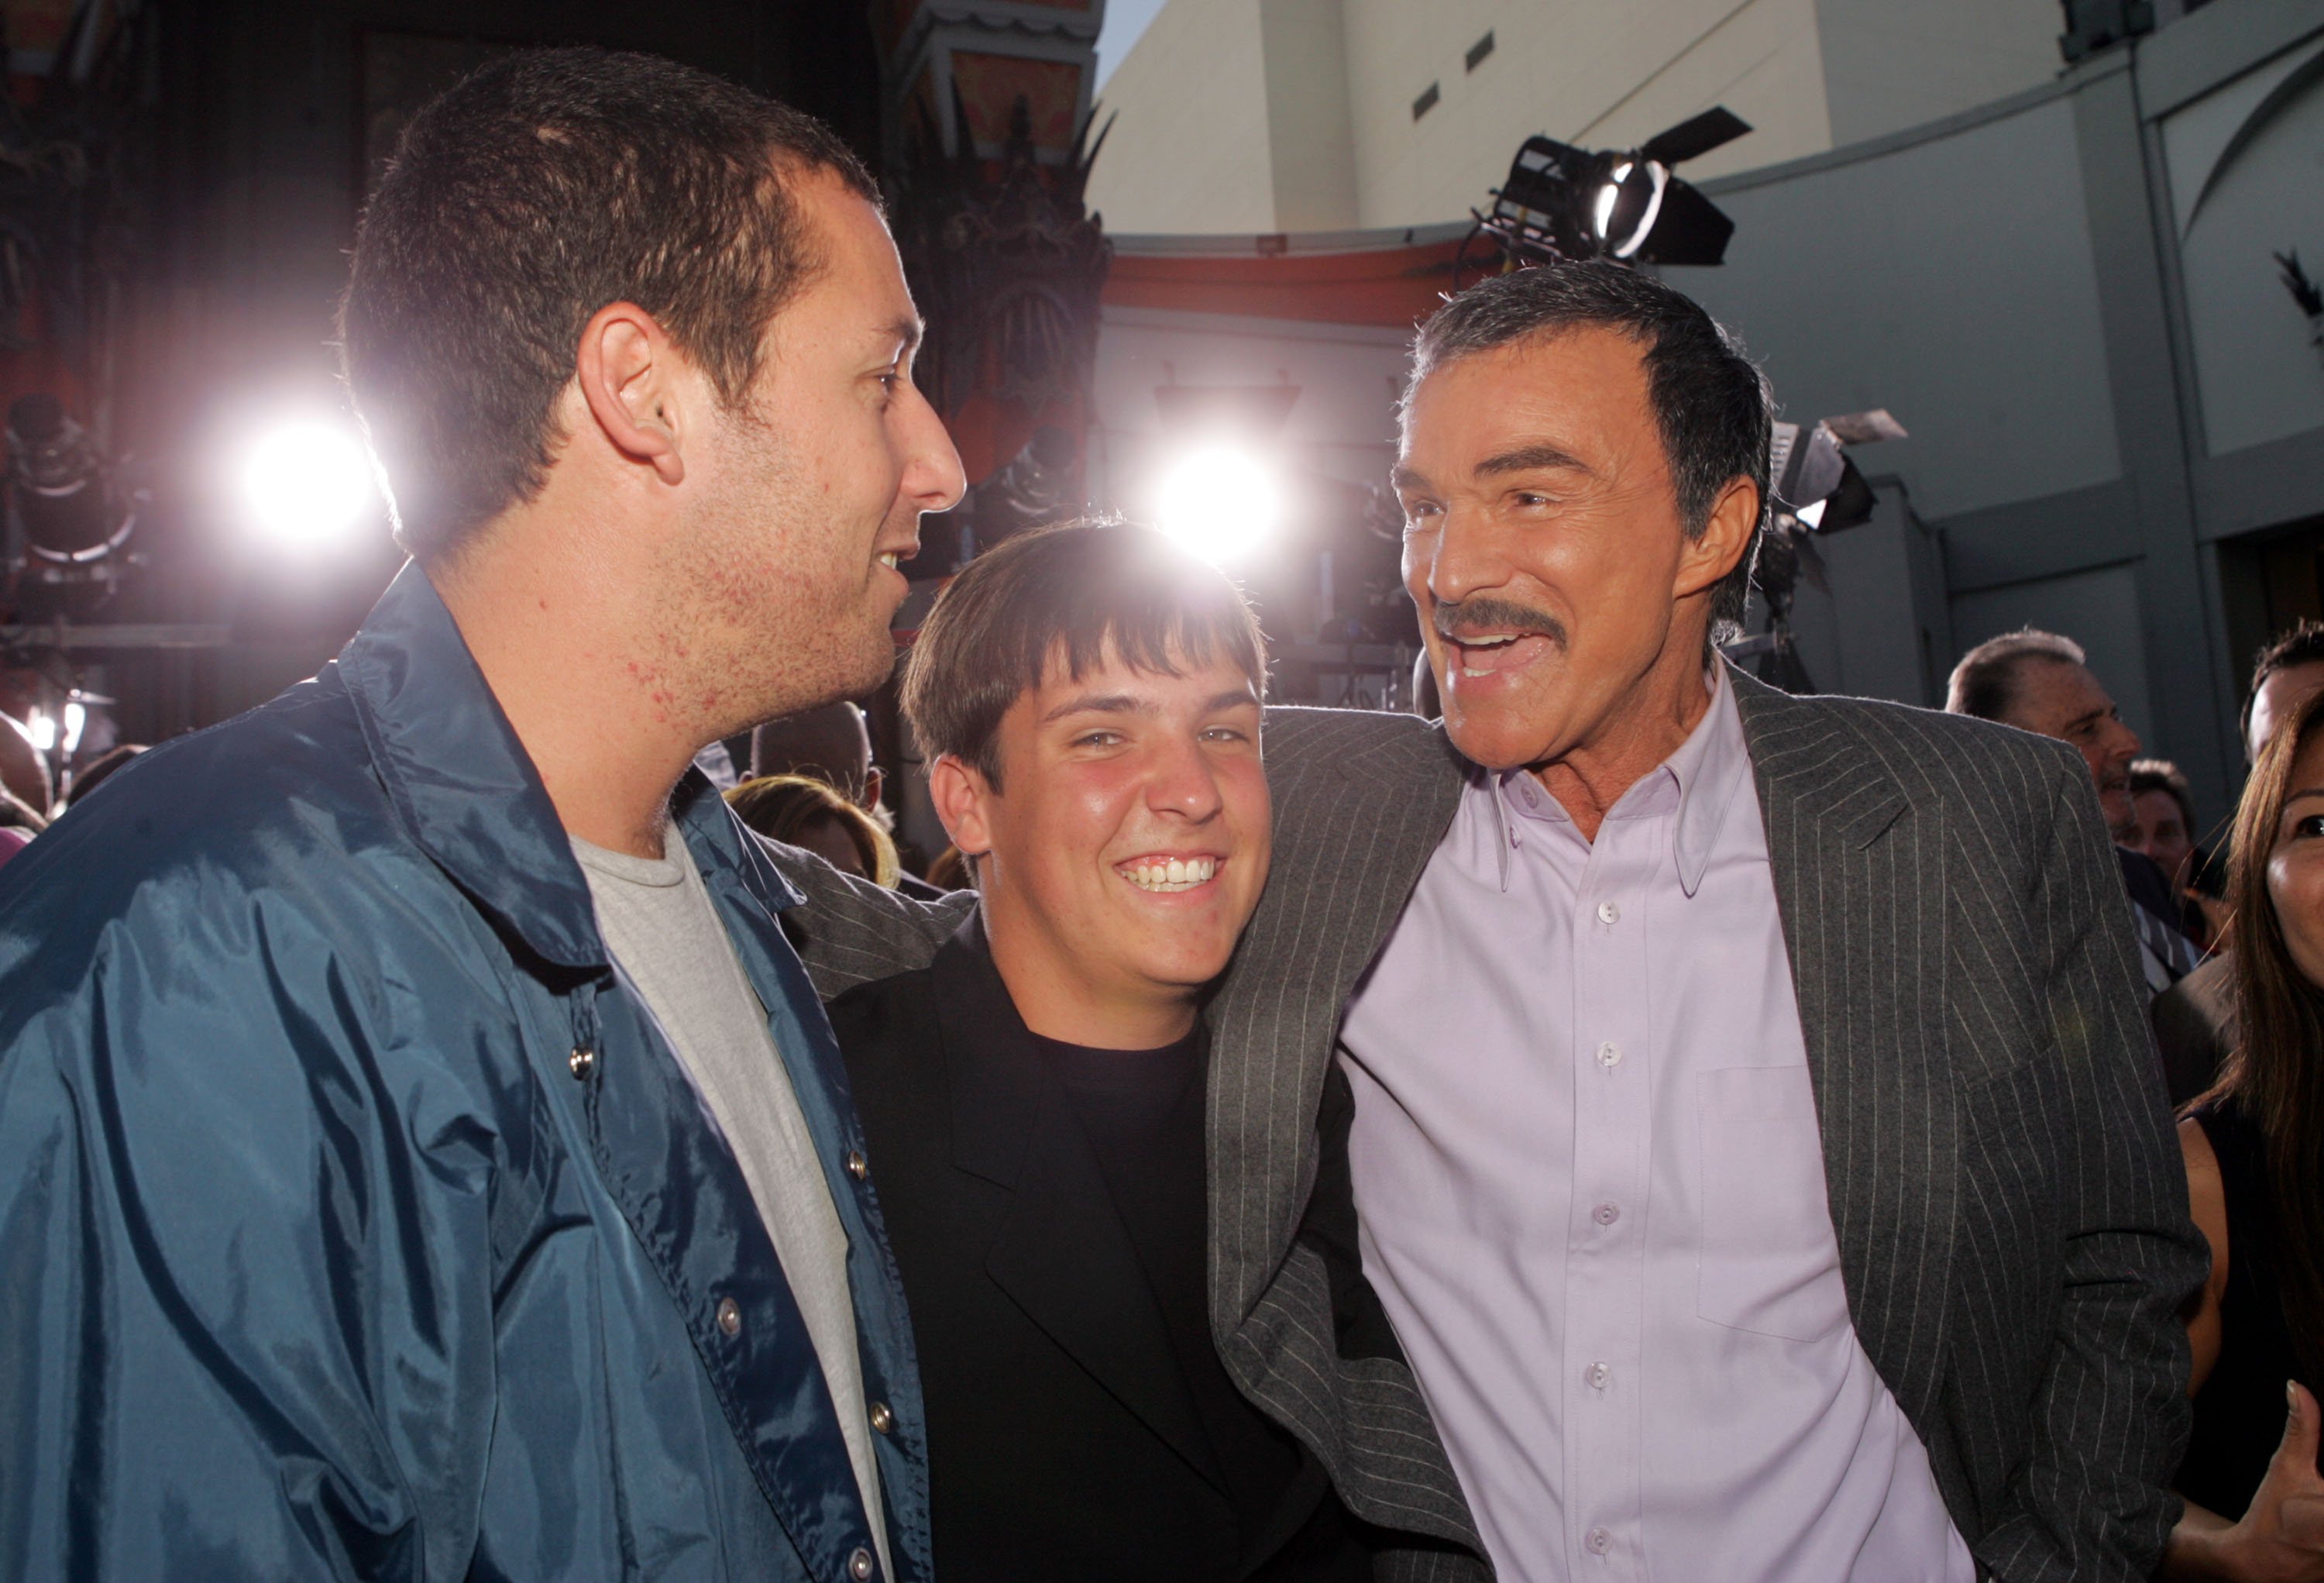 Adam Sandler and Burt Reynolds pose with Burts son Quinton at the premiere of Paramount Pictures' "The Longest Yard" at the Chinese Theater on May 19, 2005 in Los Angeles, California | Photo: Getty Images